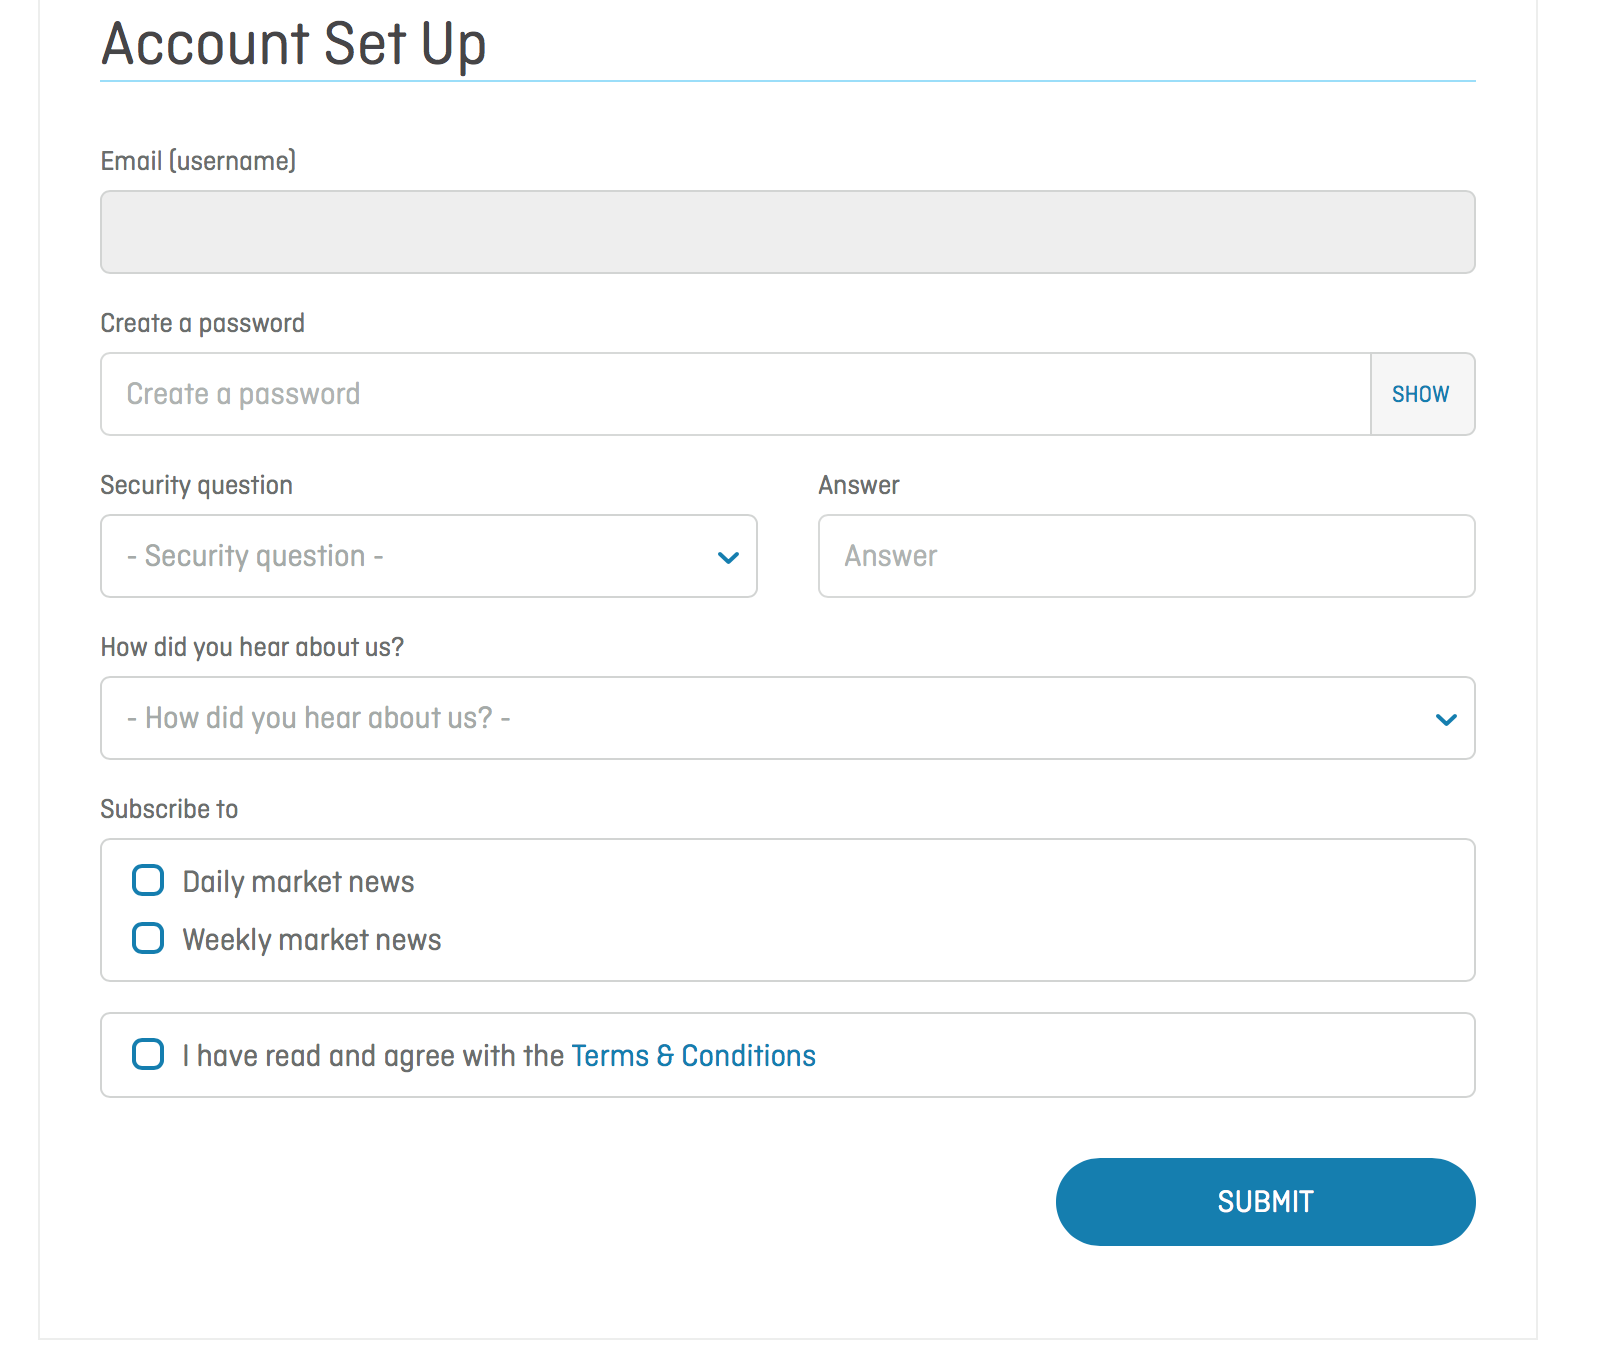 Screenshot on how to set up an account online